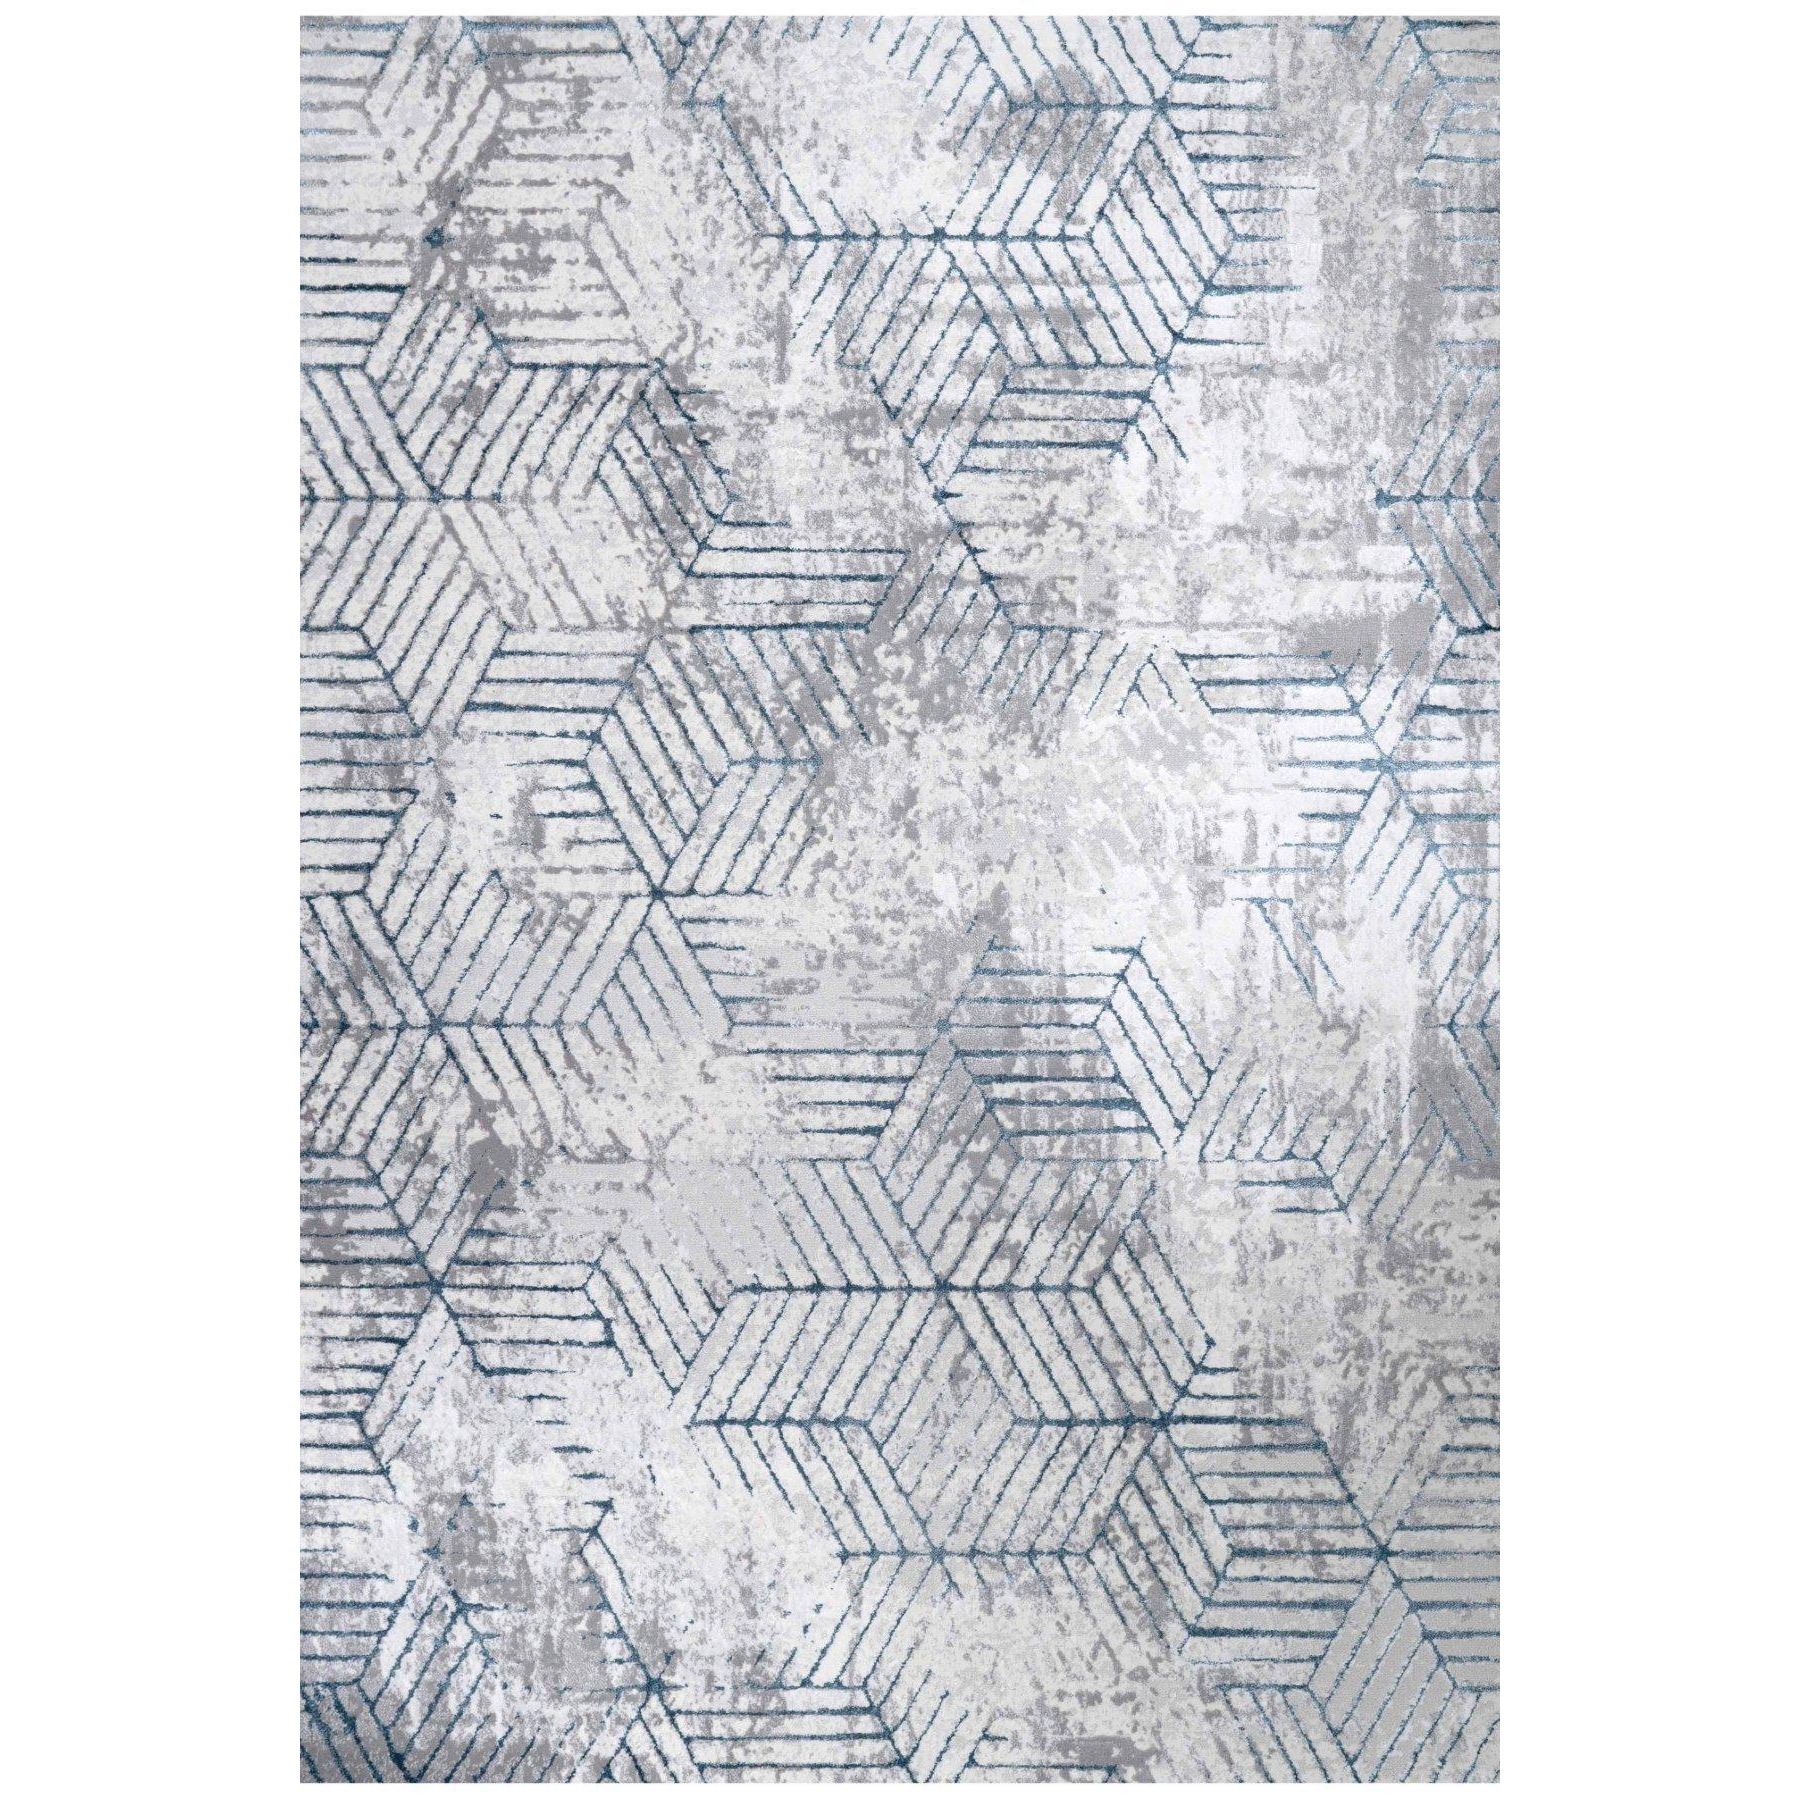 Blue Grey Distressed Abstract Geometric Motif Rug - image 1